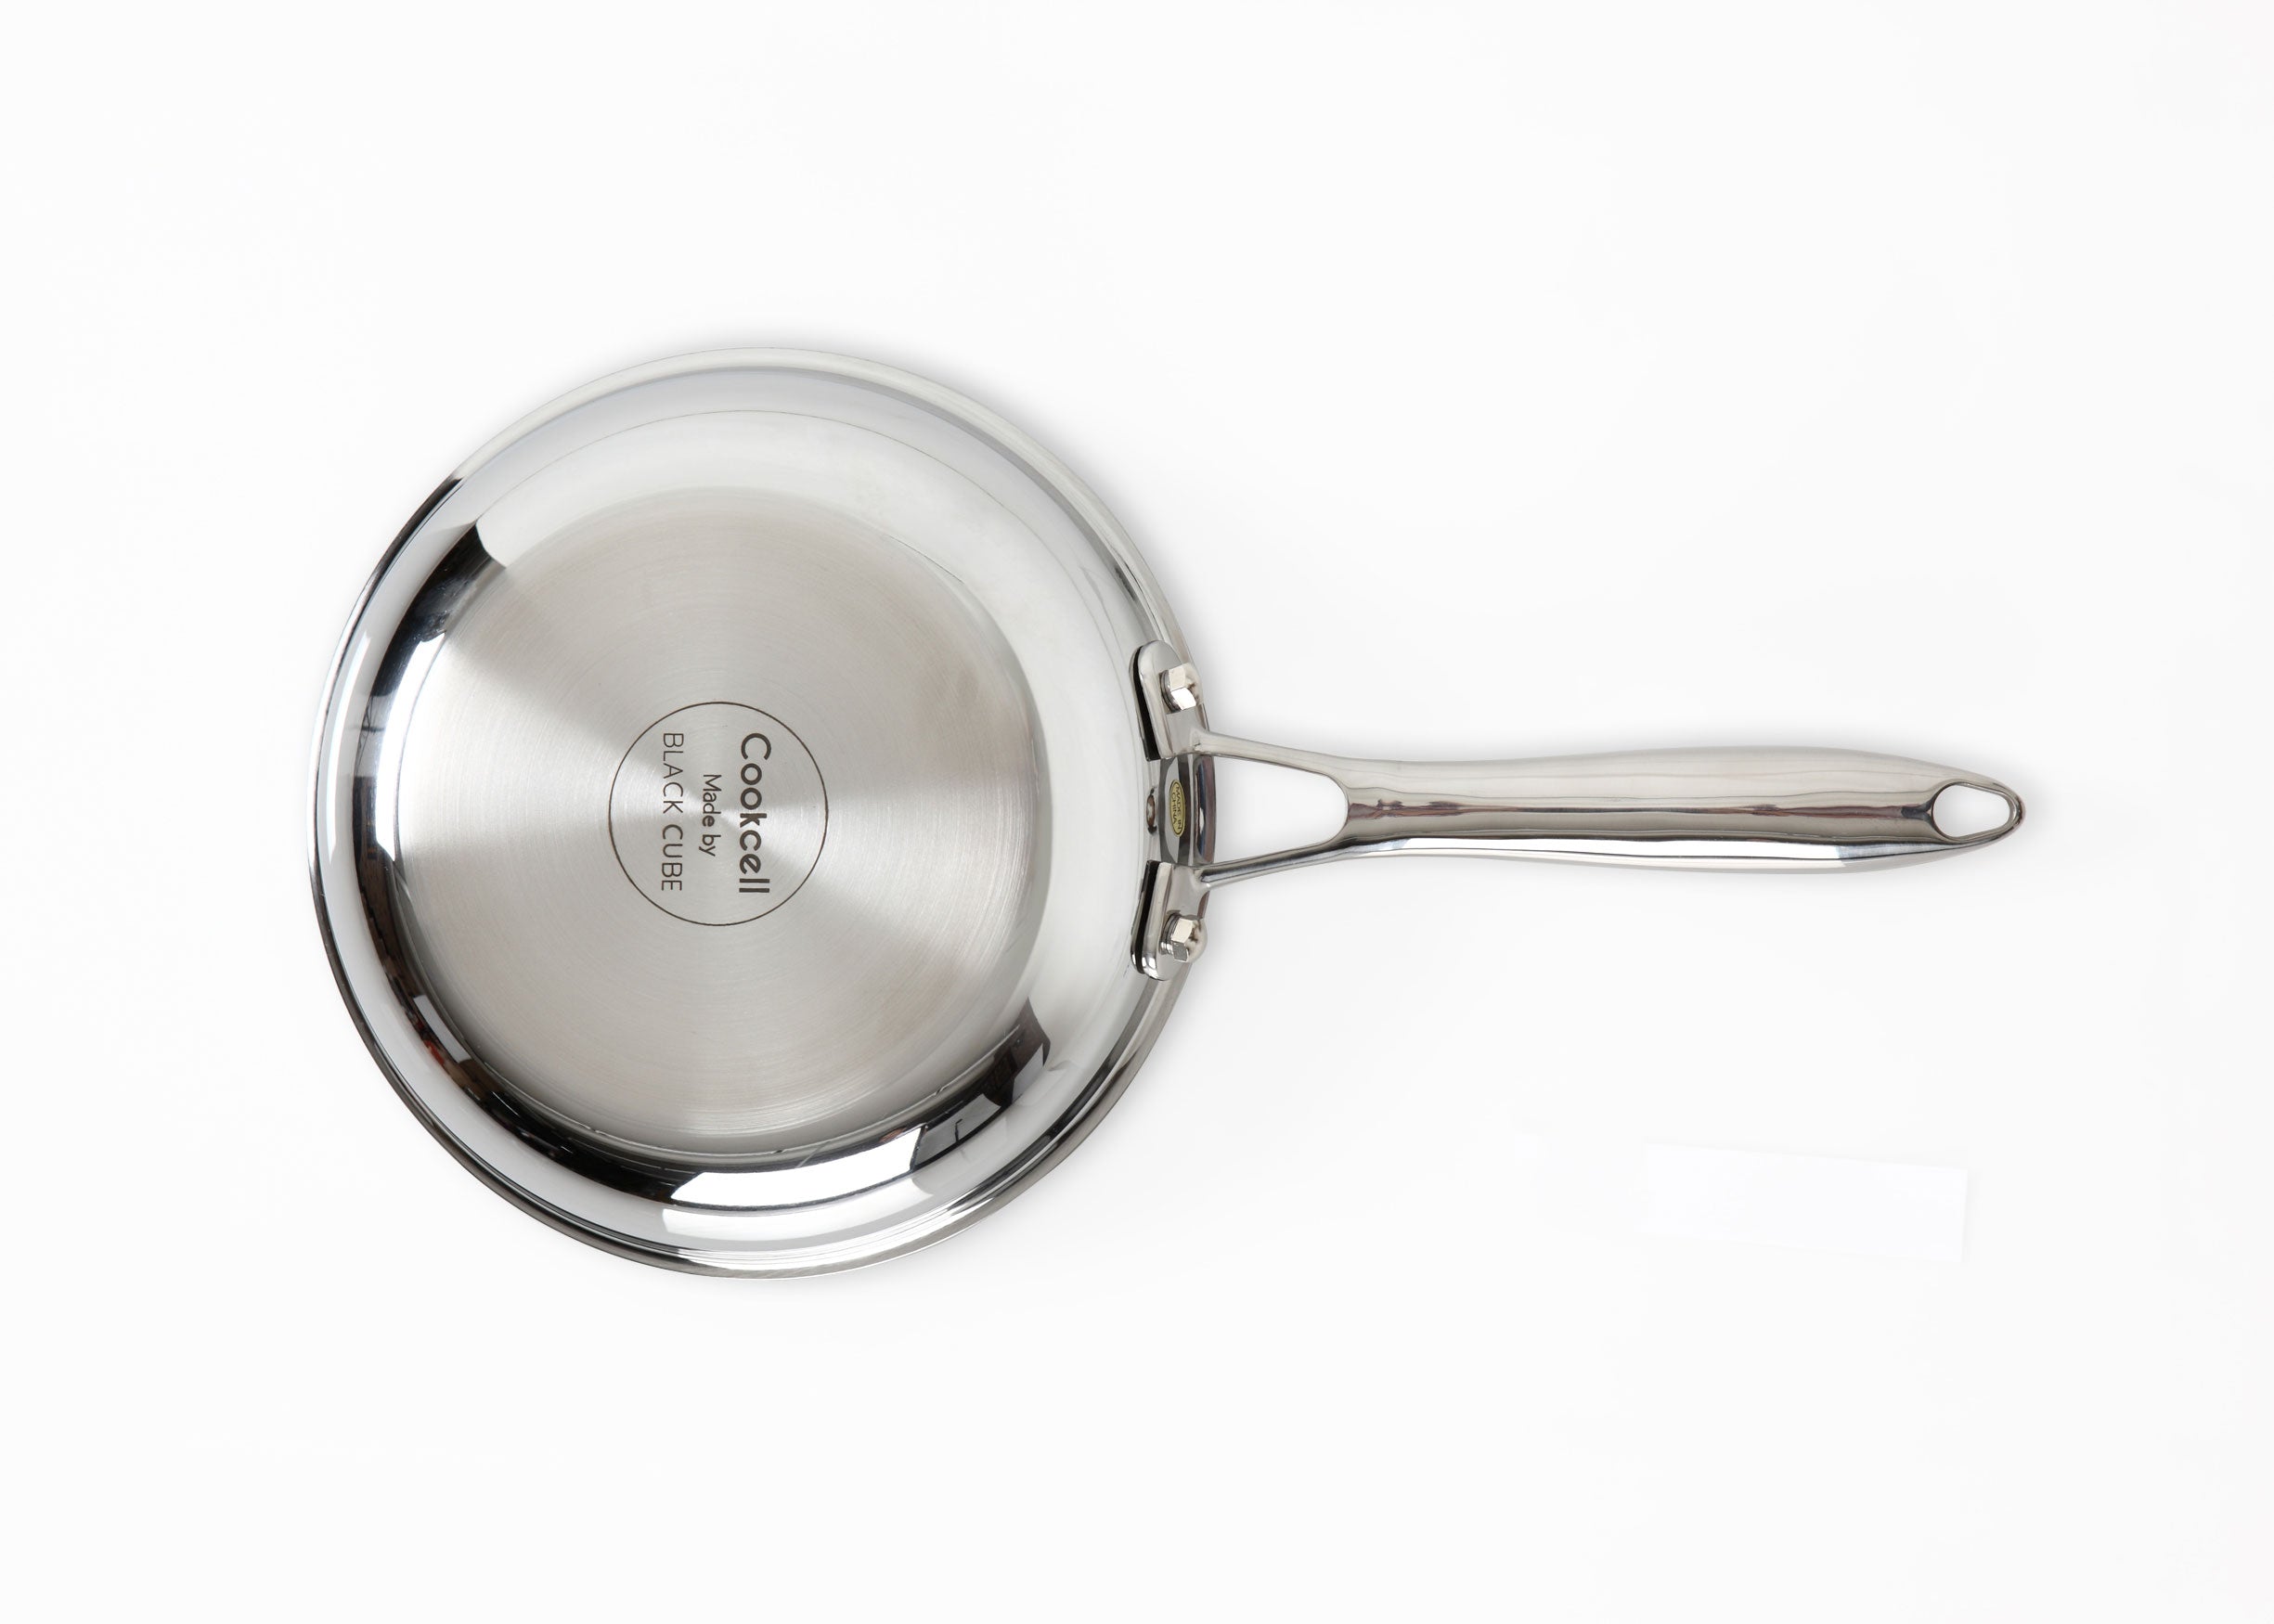 COOKCELL Stainless Steel Non-stick Hybrid Frypan 28cm